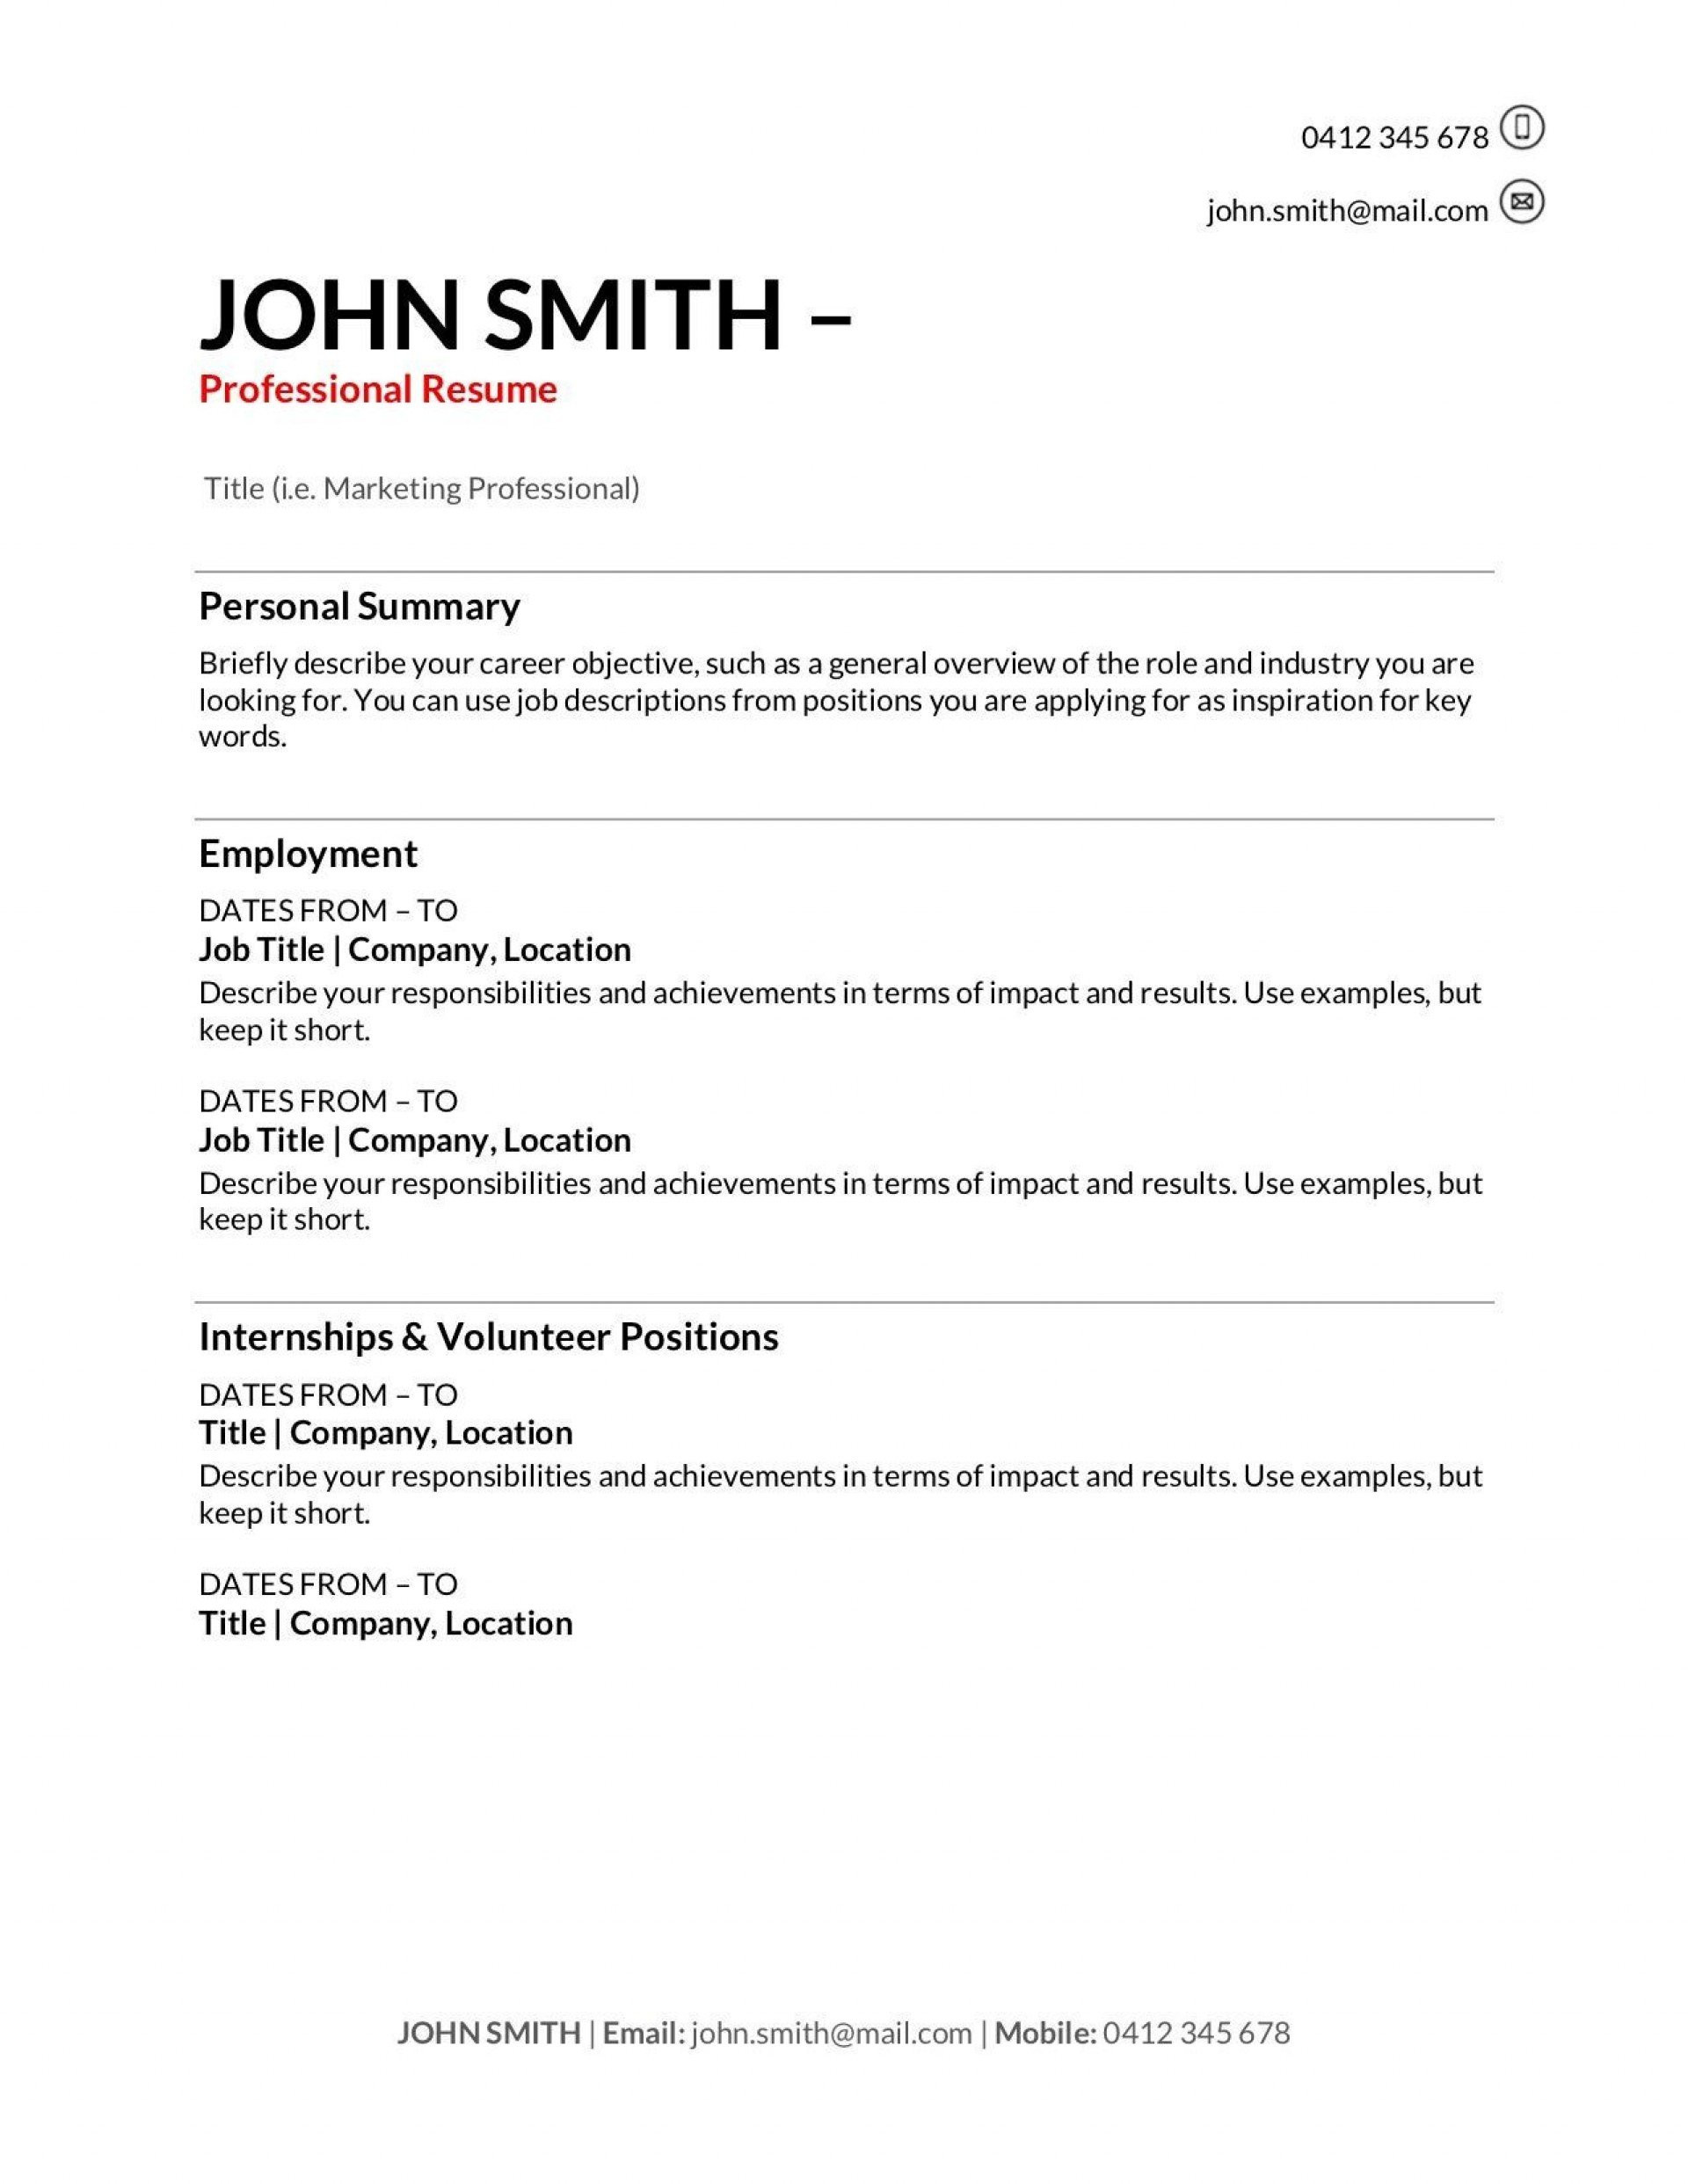 how to make a resume for your first job examples